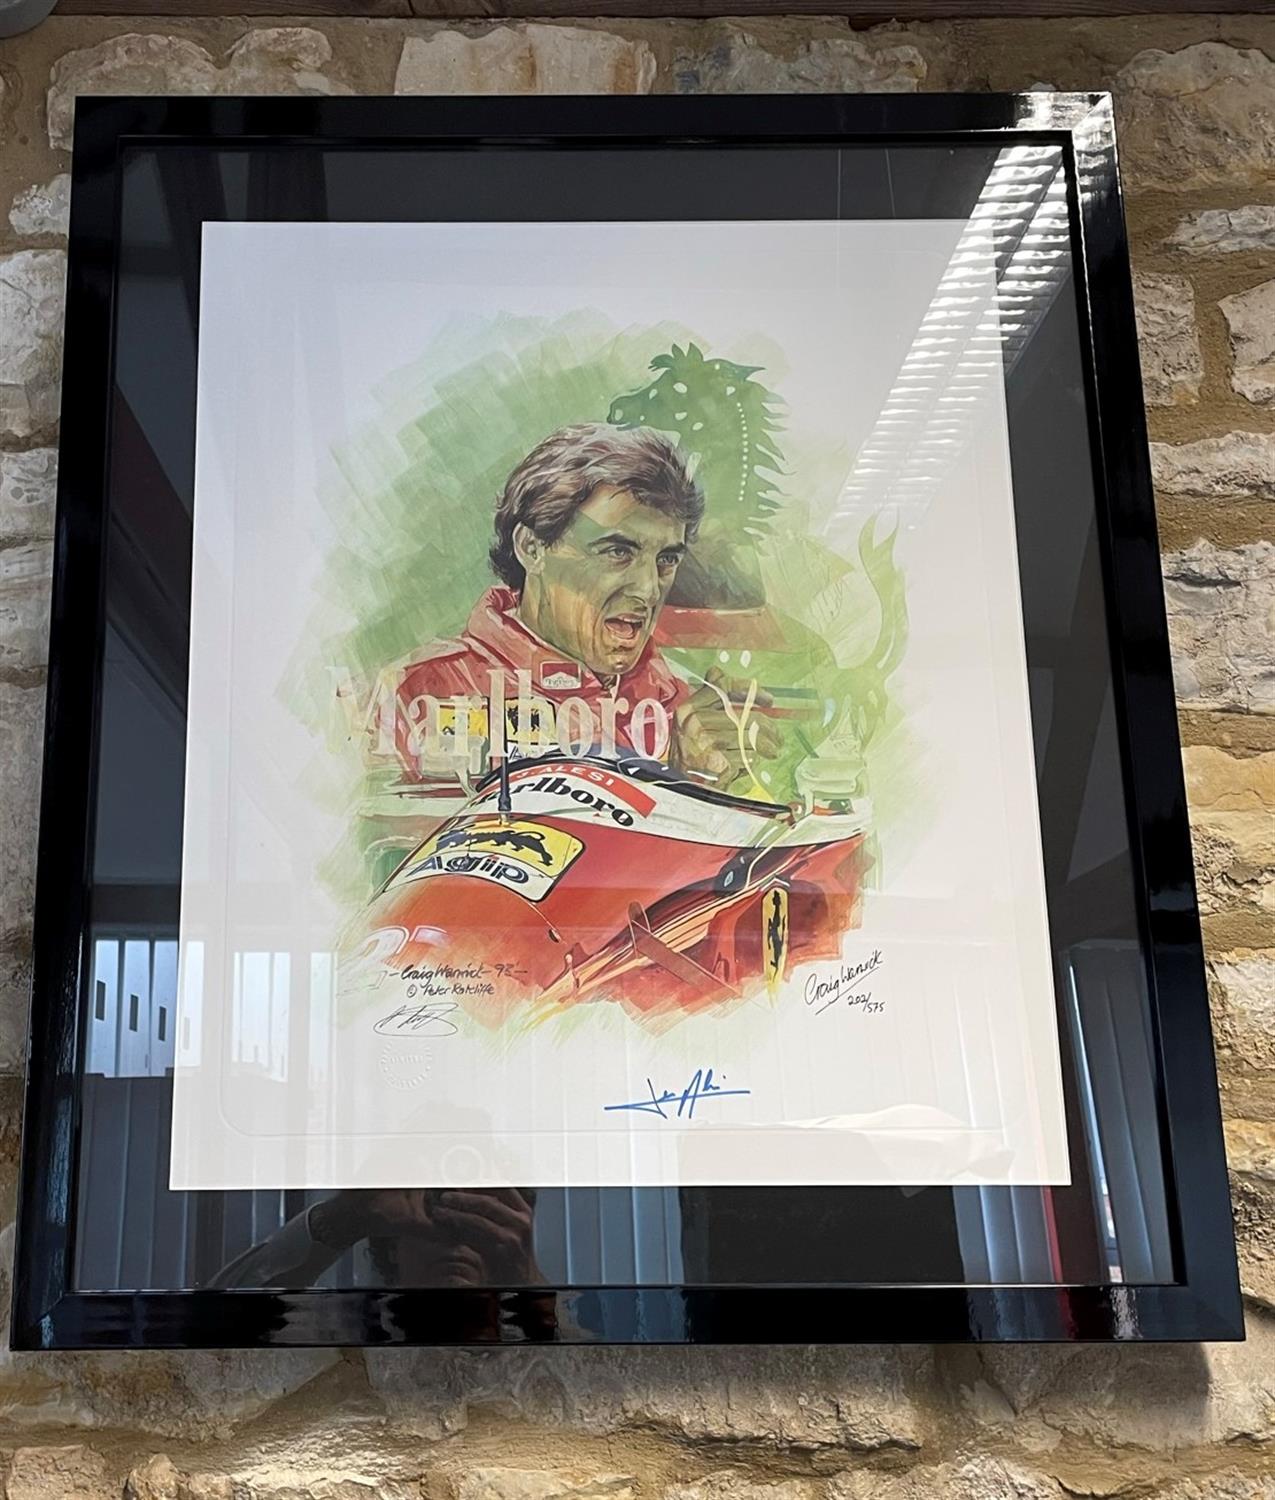 Jean Alesi Framed and Signed Collage Print by Craig Warwick - Image 3 of 6